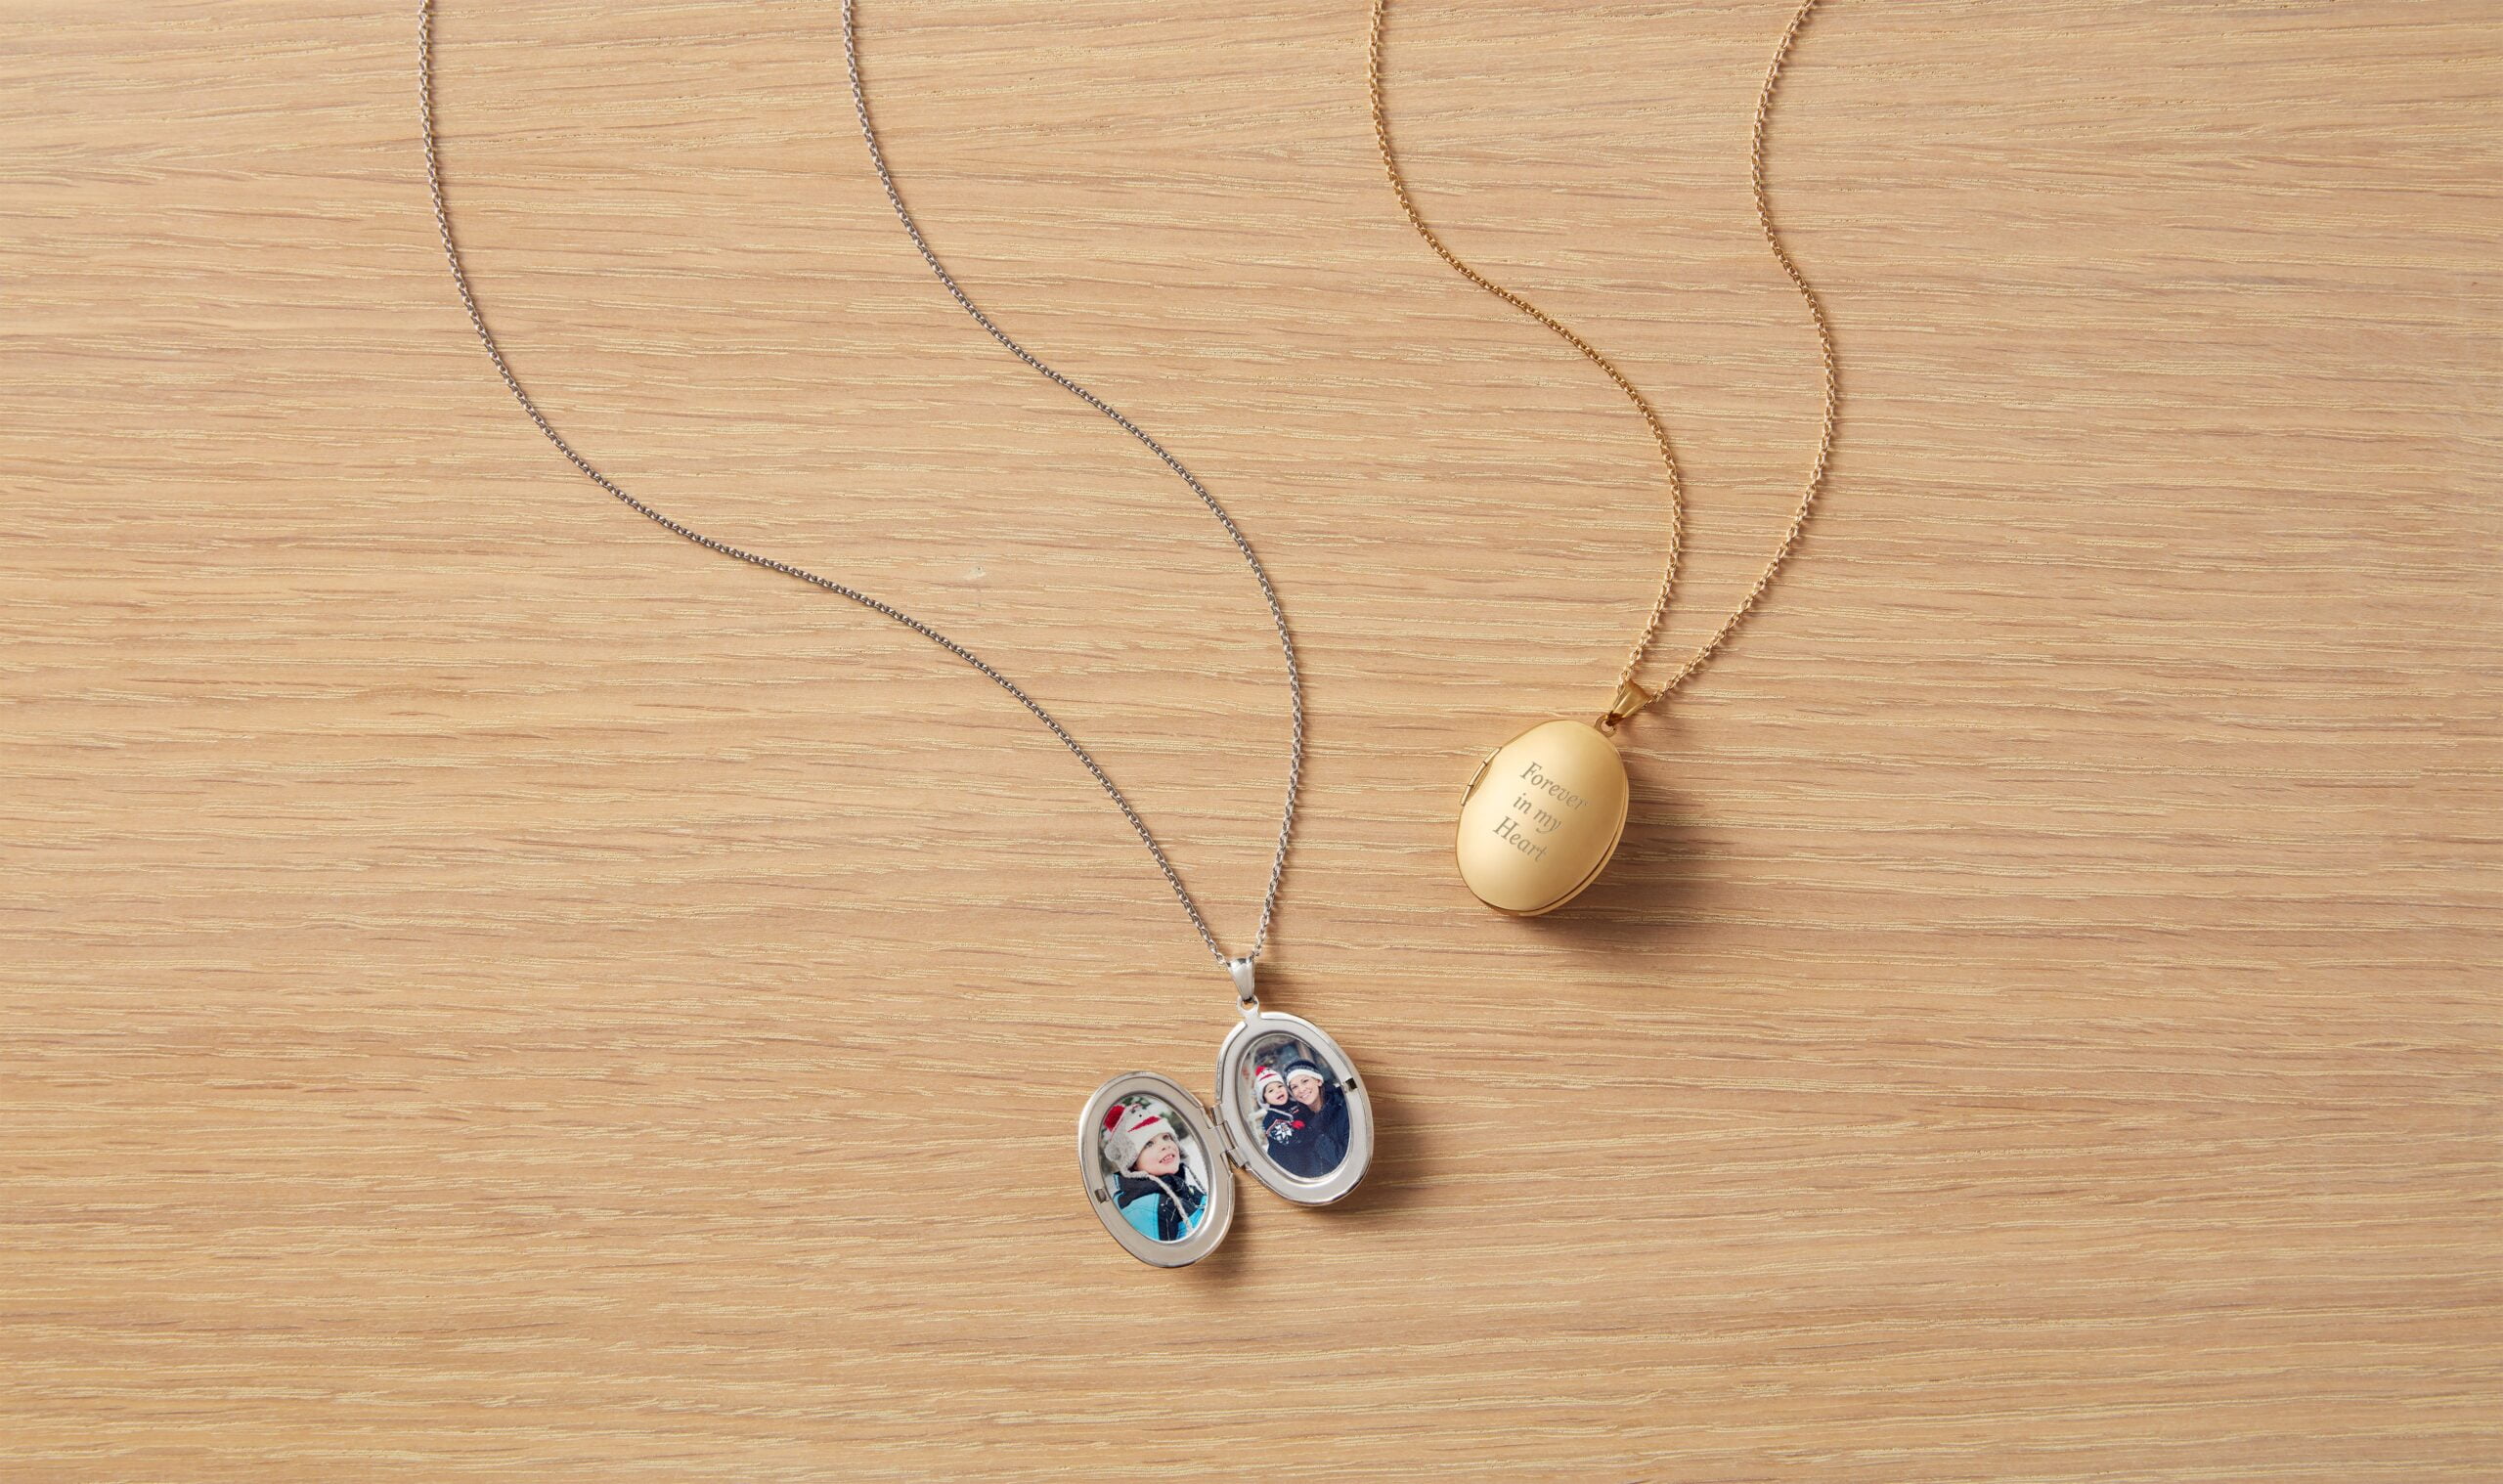 two locket necklaces with one open featuring a photo and the other closed